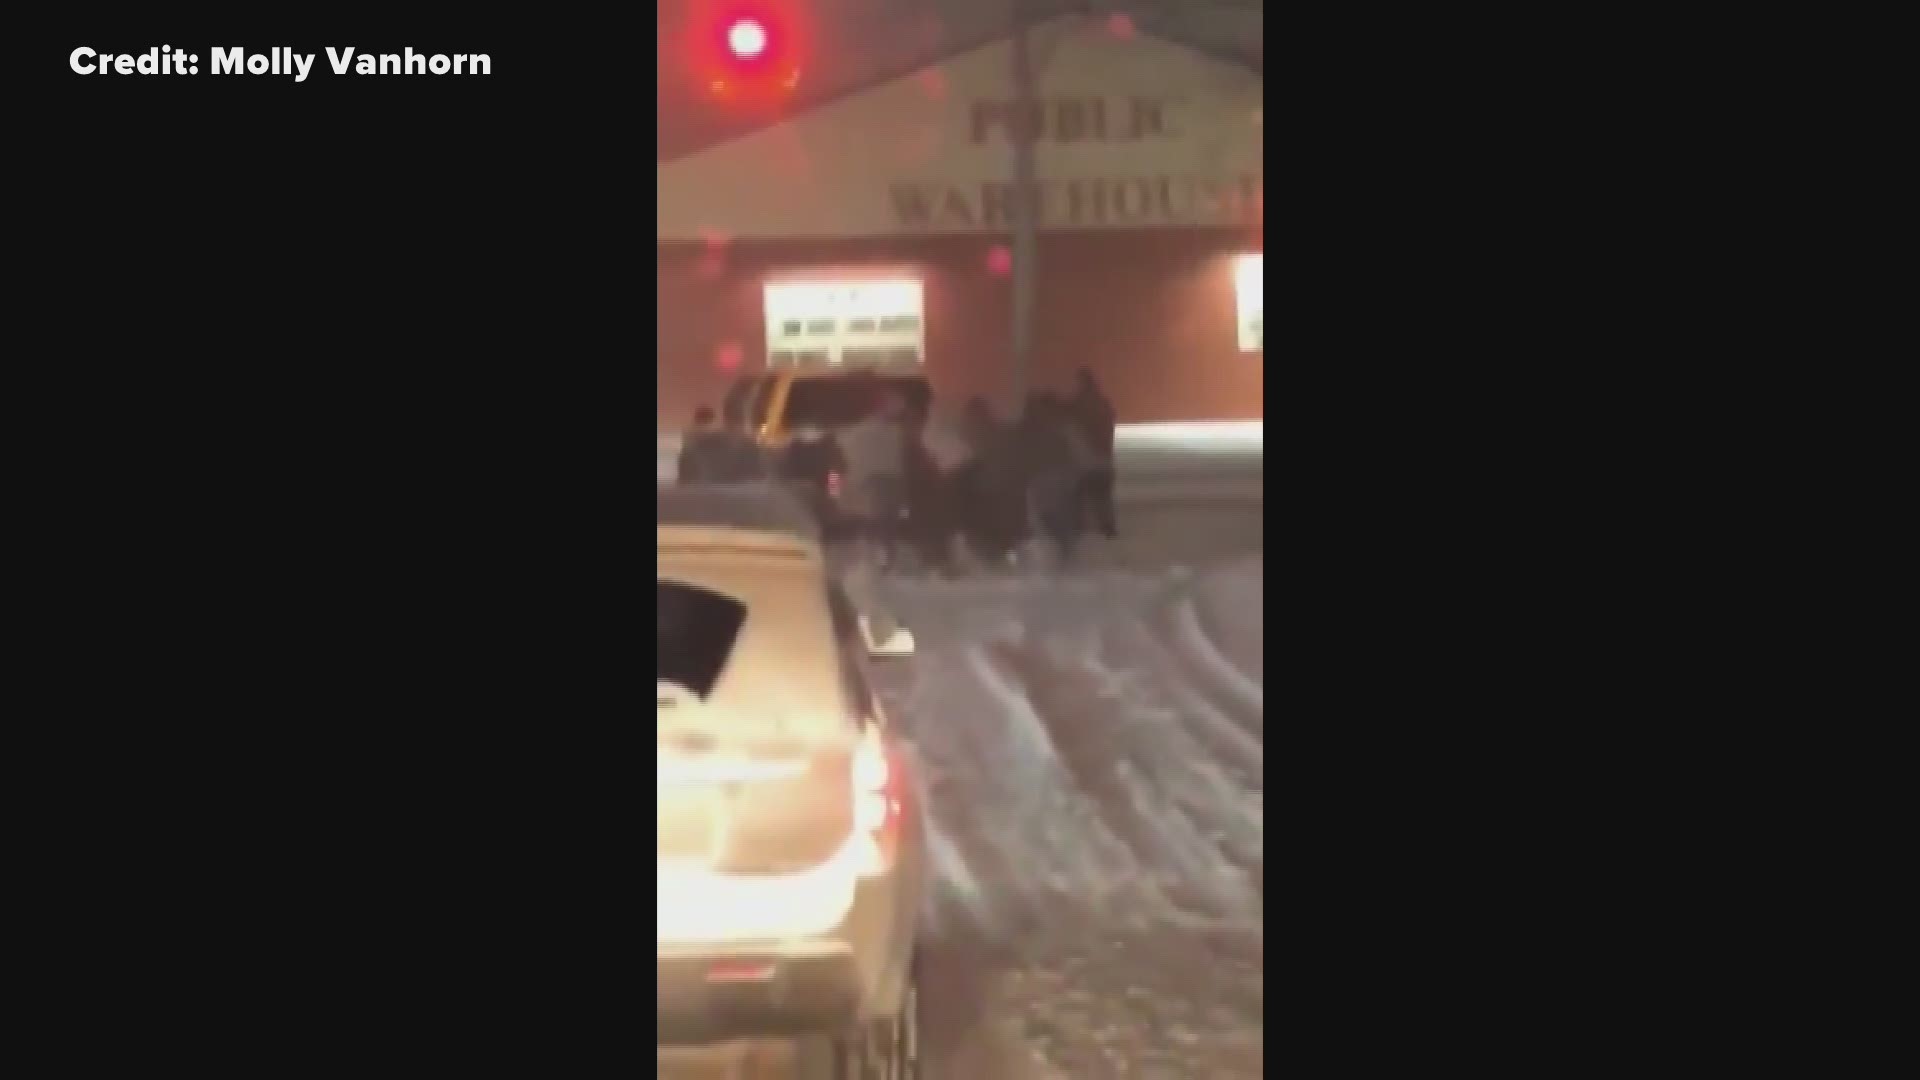 The Greenville High School wrestling team helped push a stuck car out of the snow at 5:30 a.m. Saturday morning.